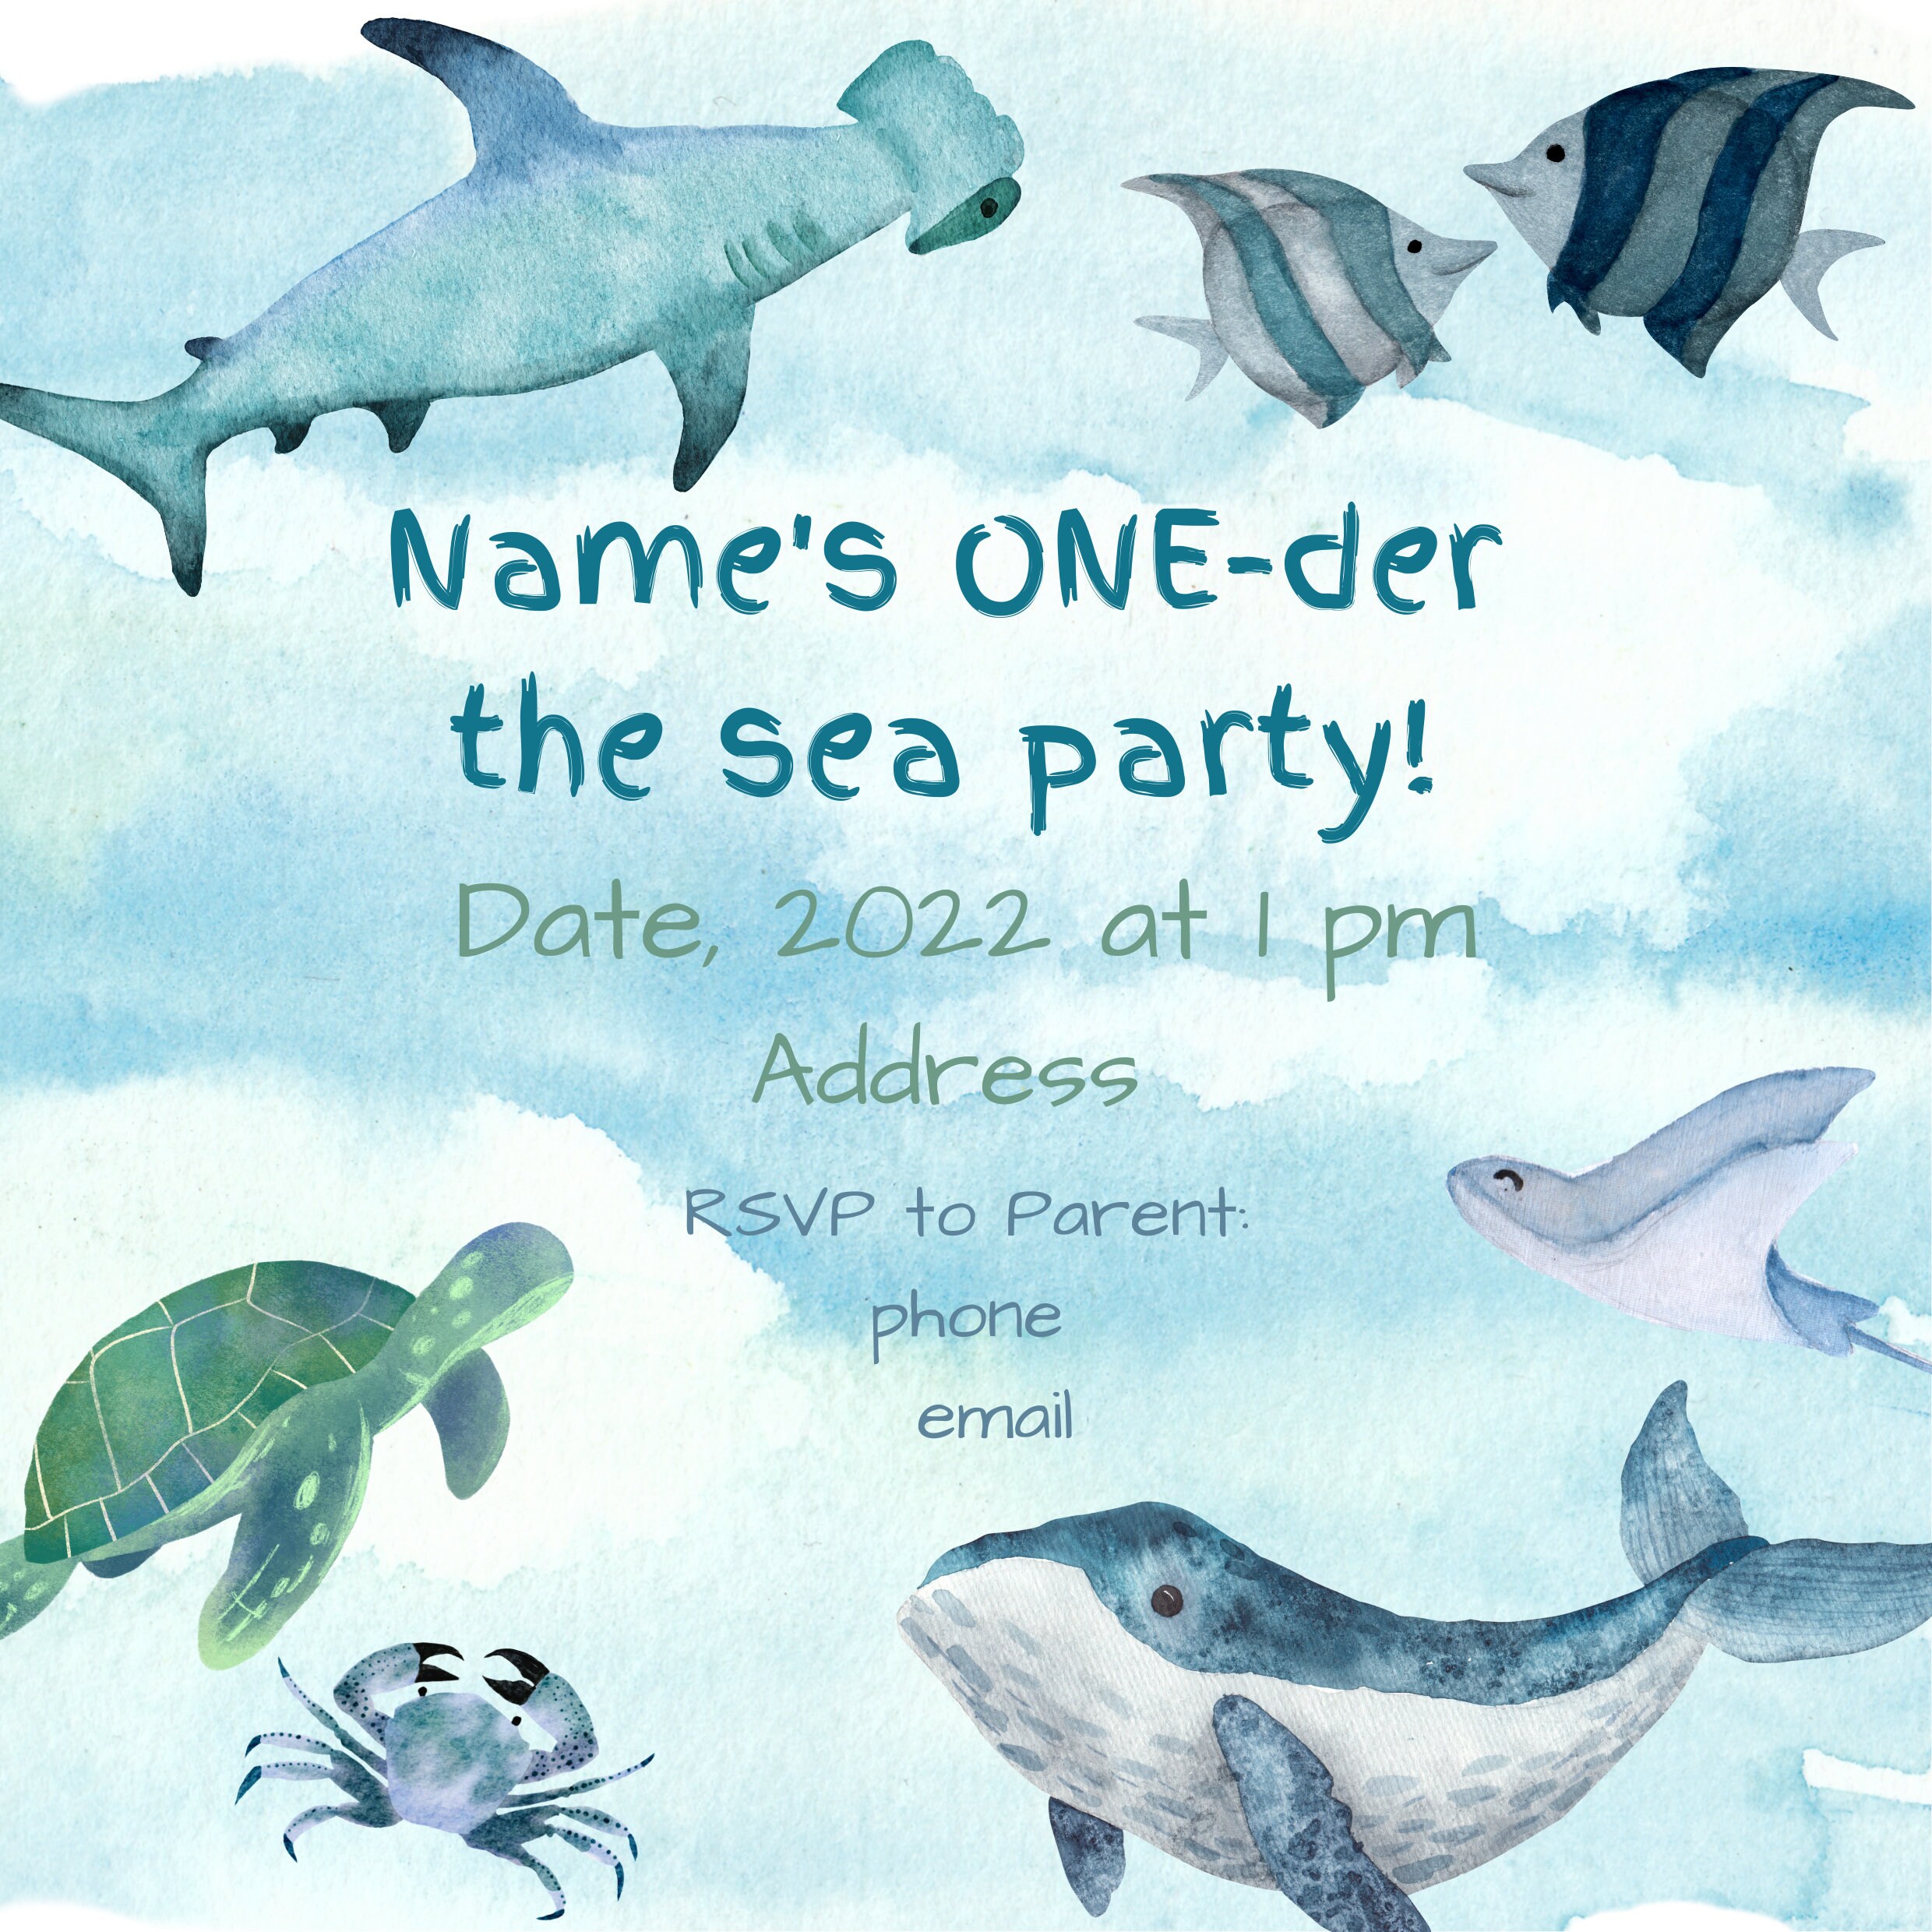 One-der the Sea Party 